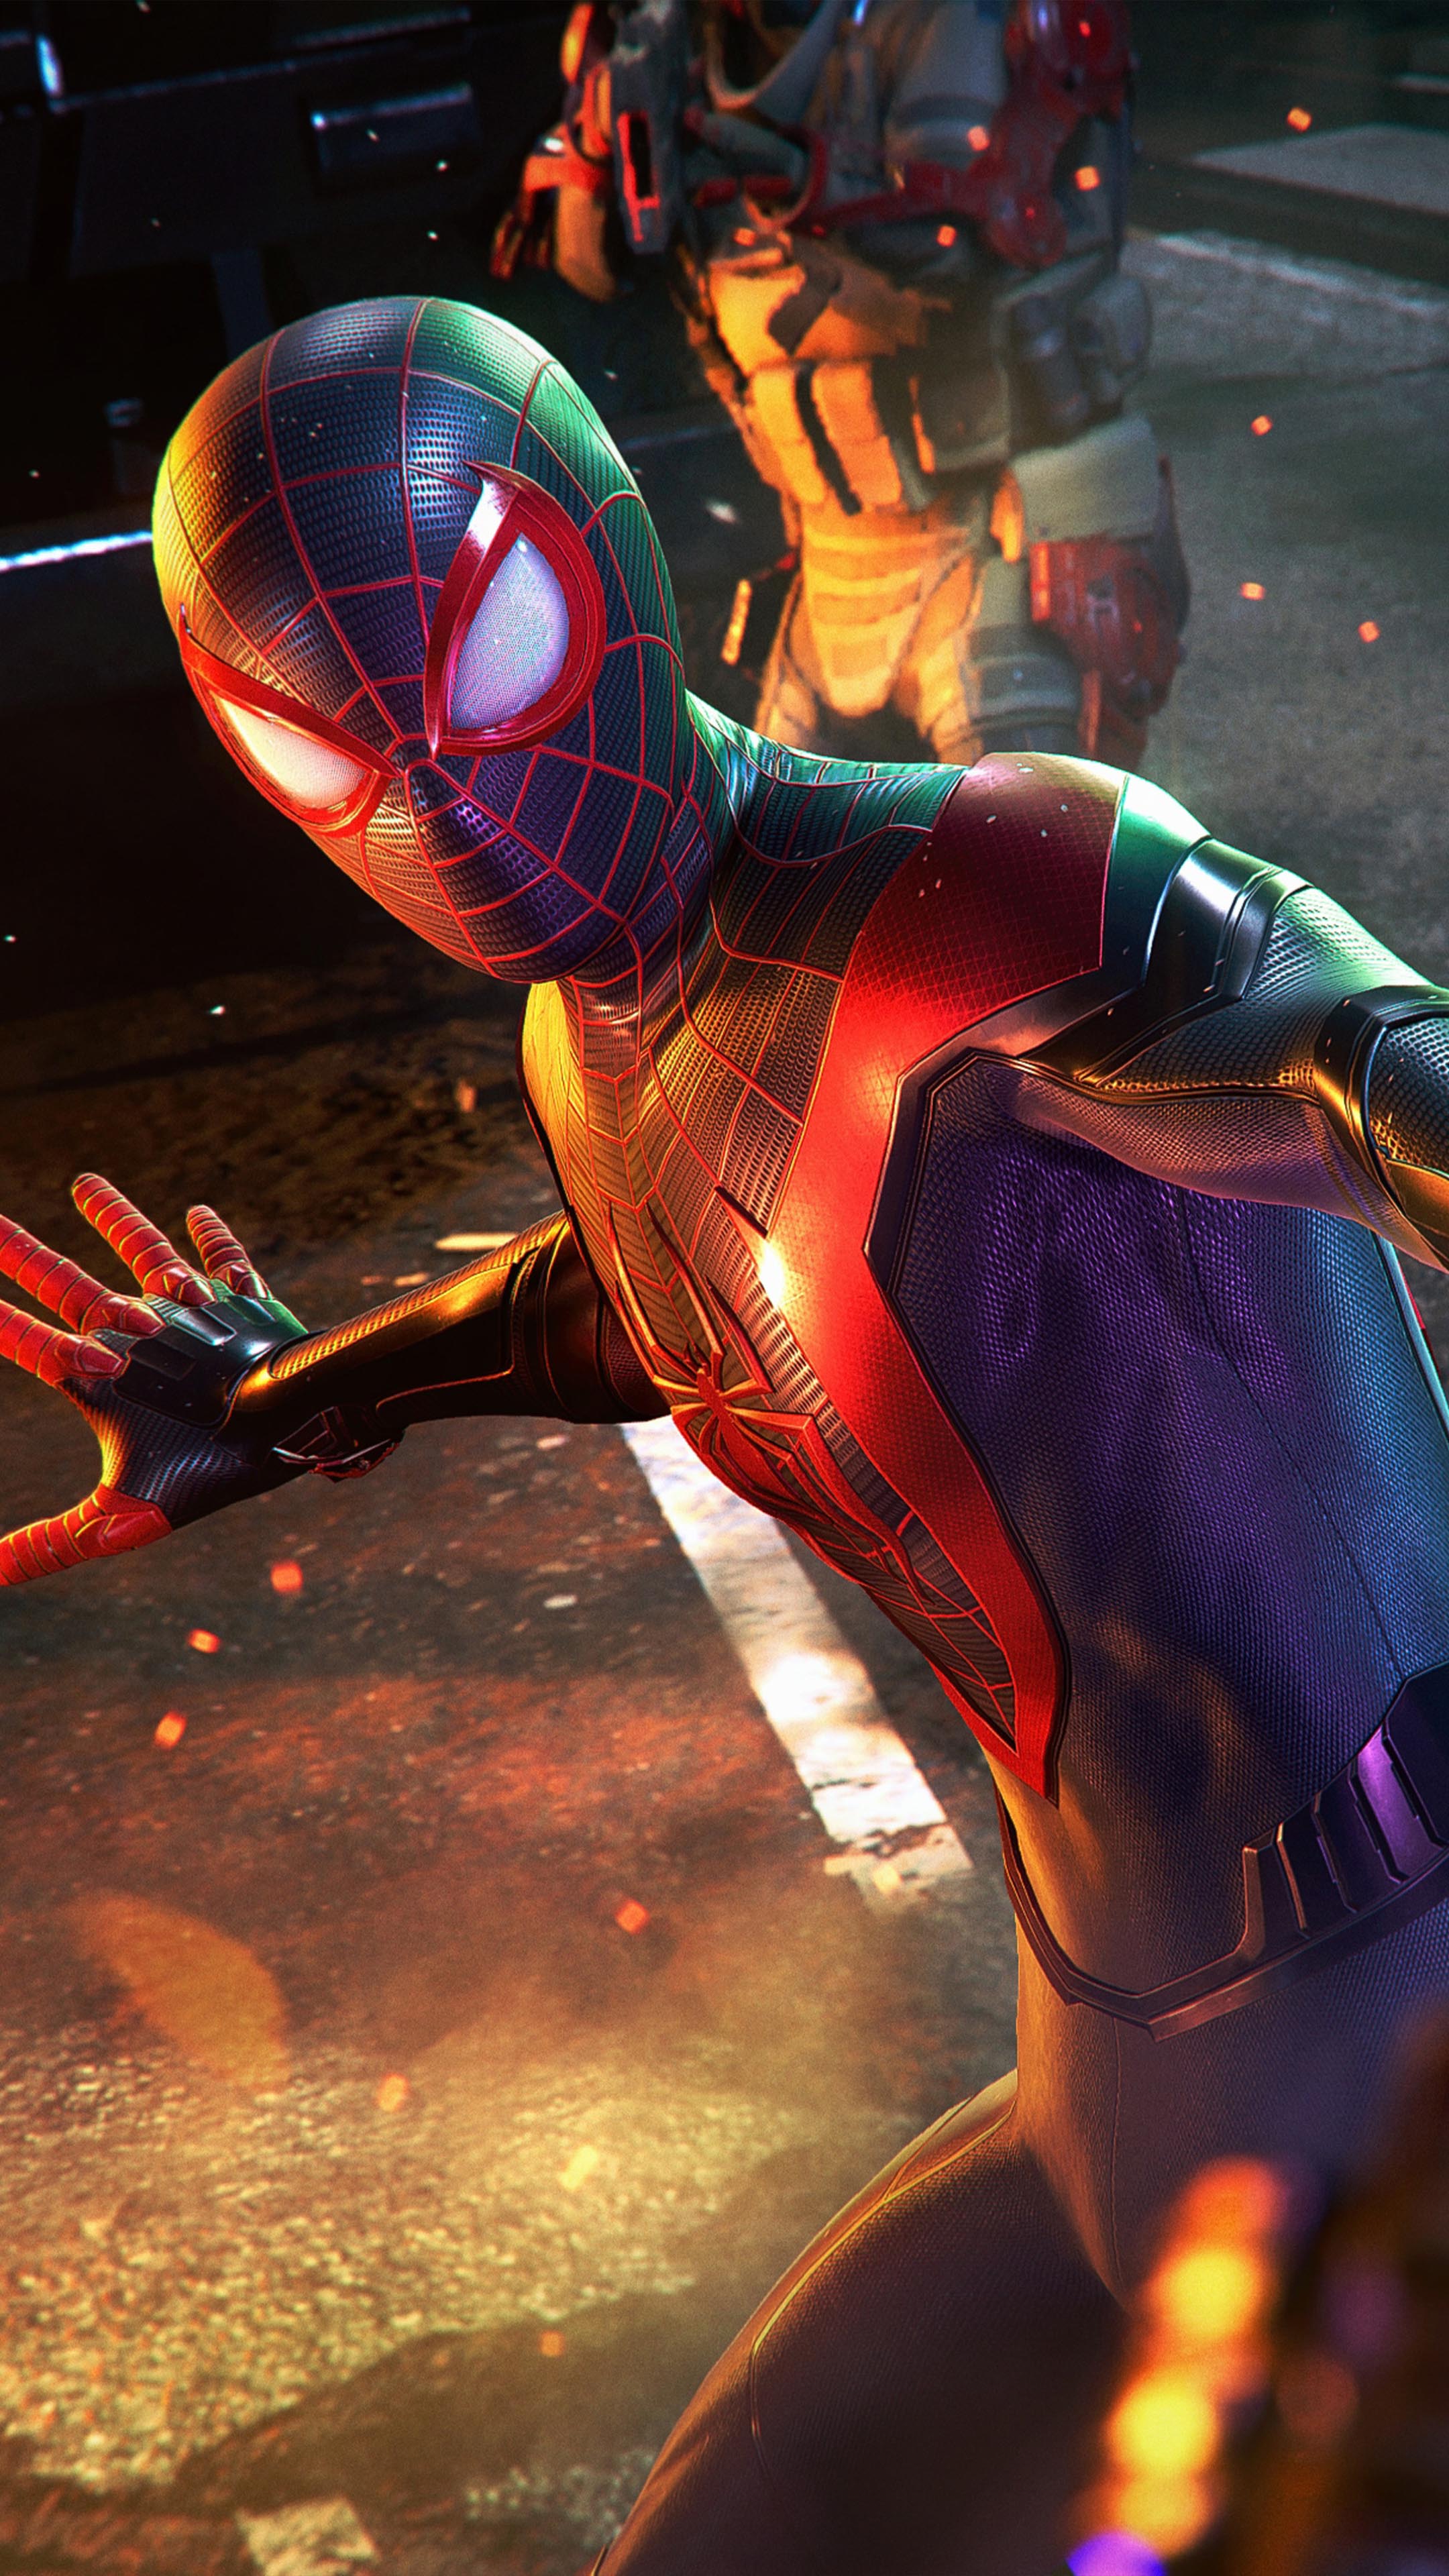 Marvel's Spider-Man Wallpapers in Ultra HD